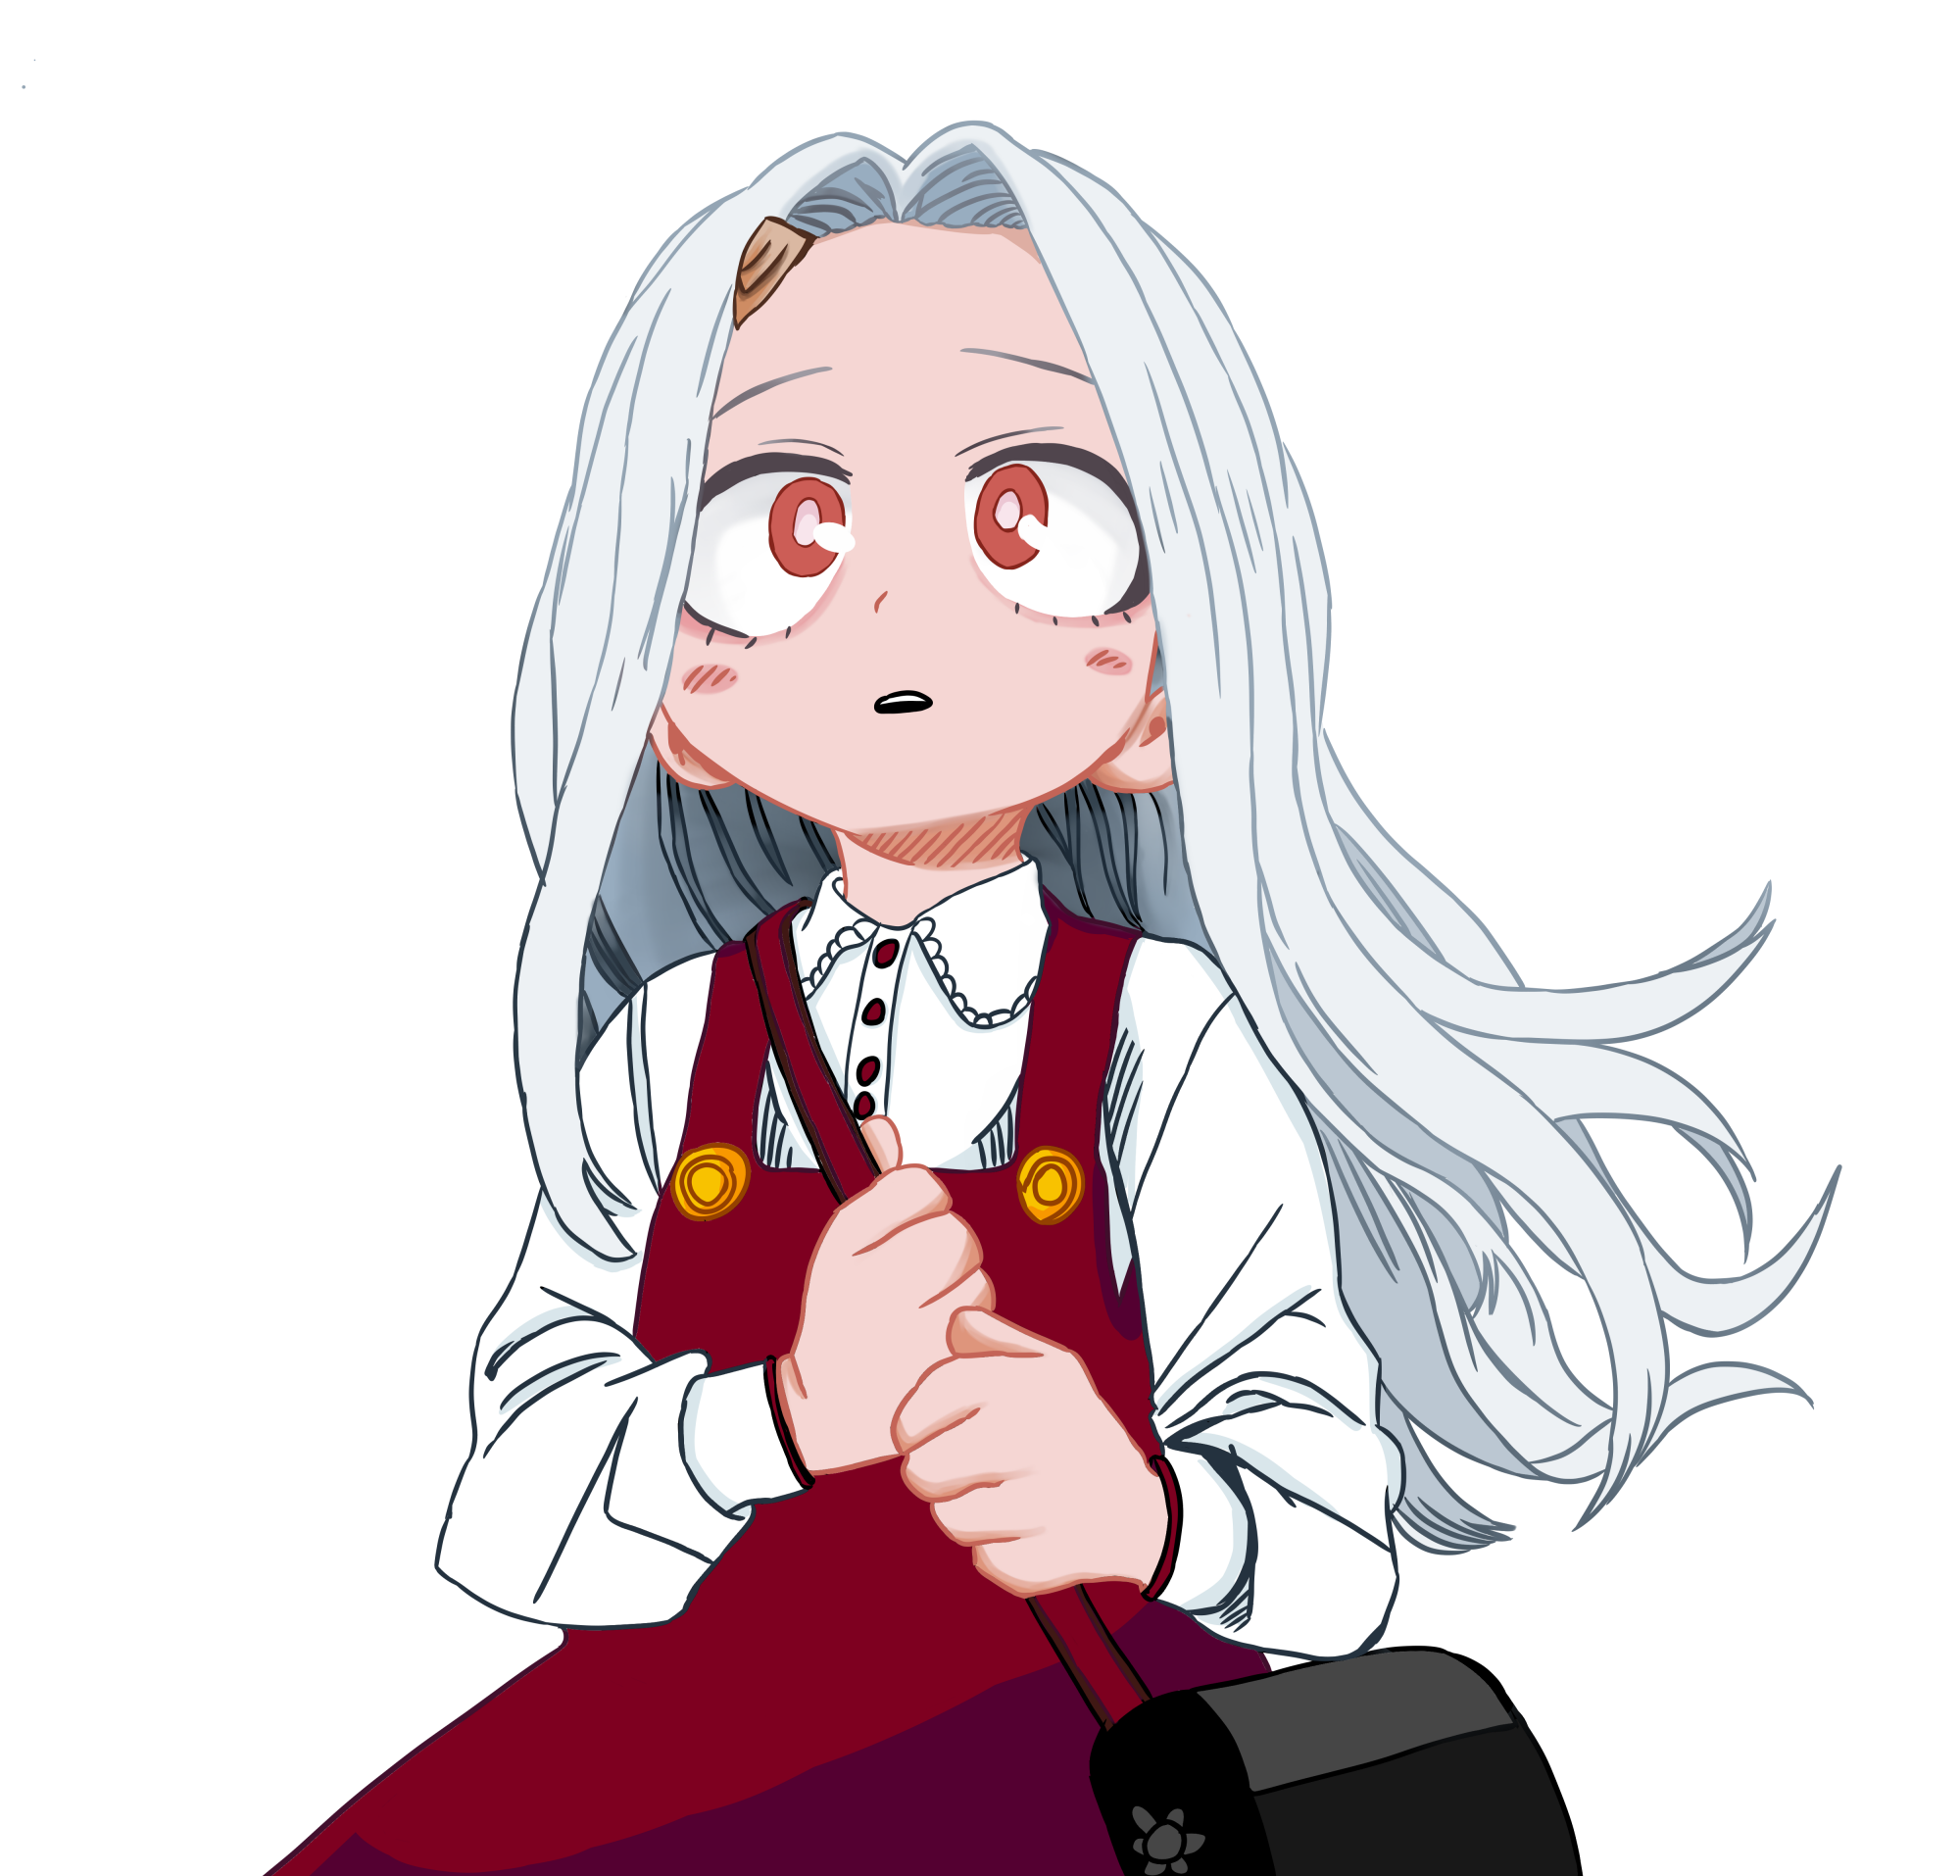 What if Eri got older and joined UA High What class will she be